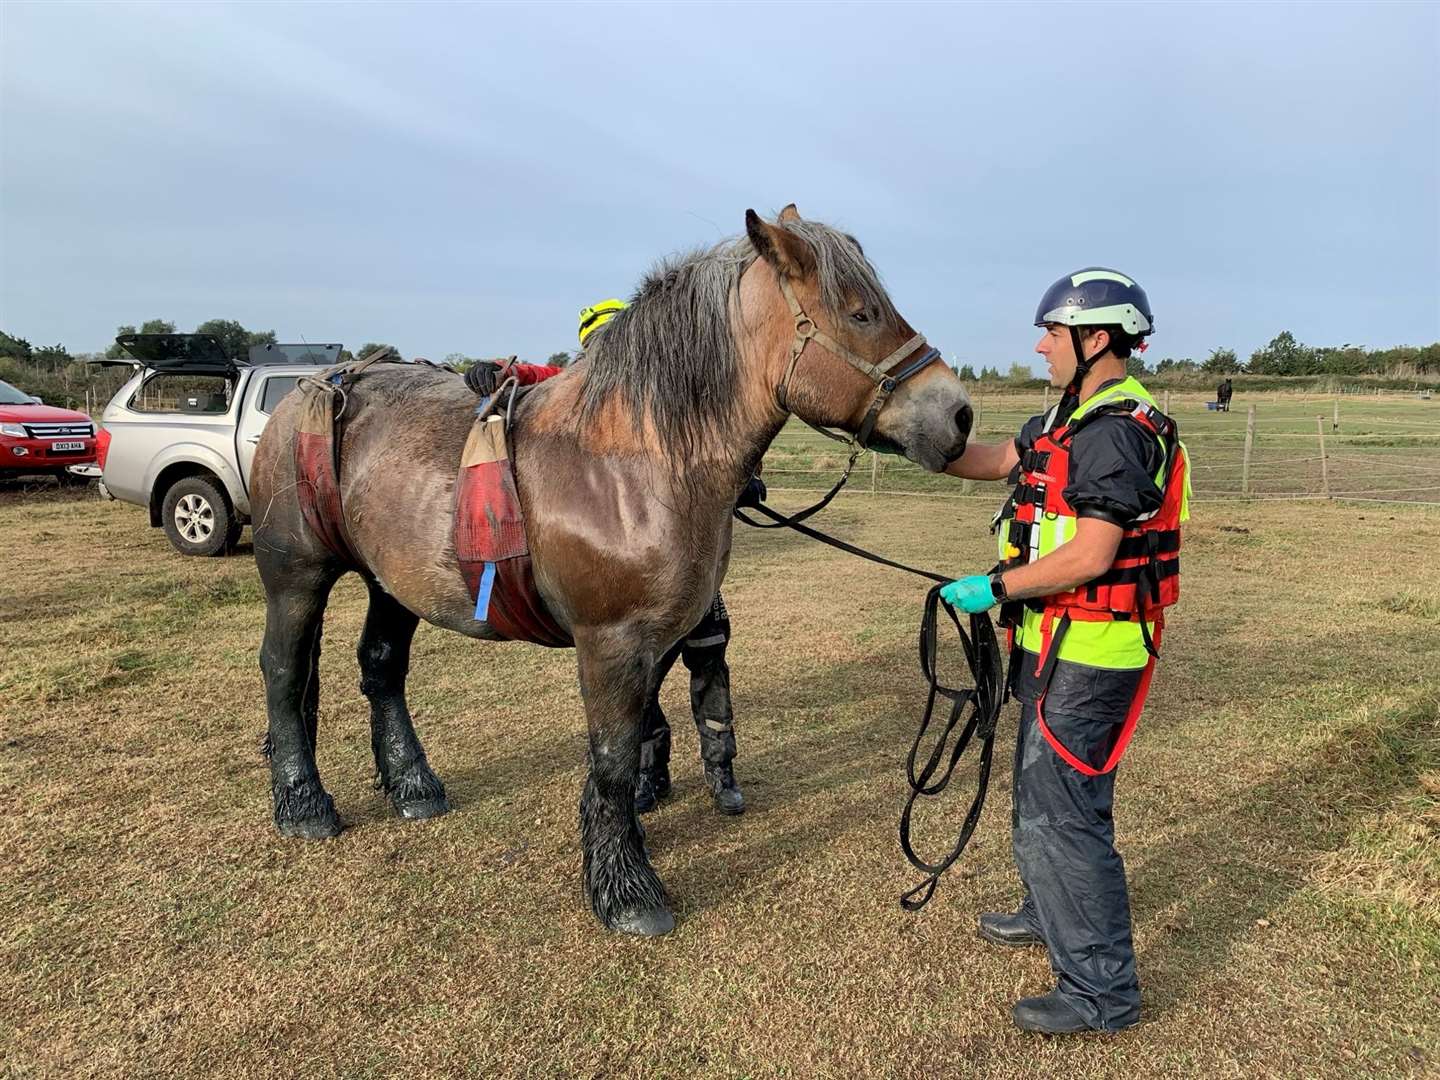 Waffle was taken back to her stable for a bath. Photo: KFRS